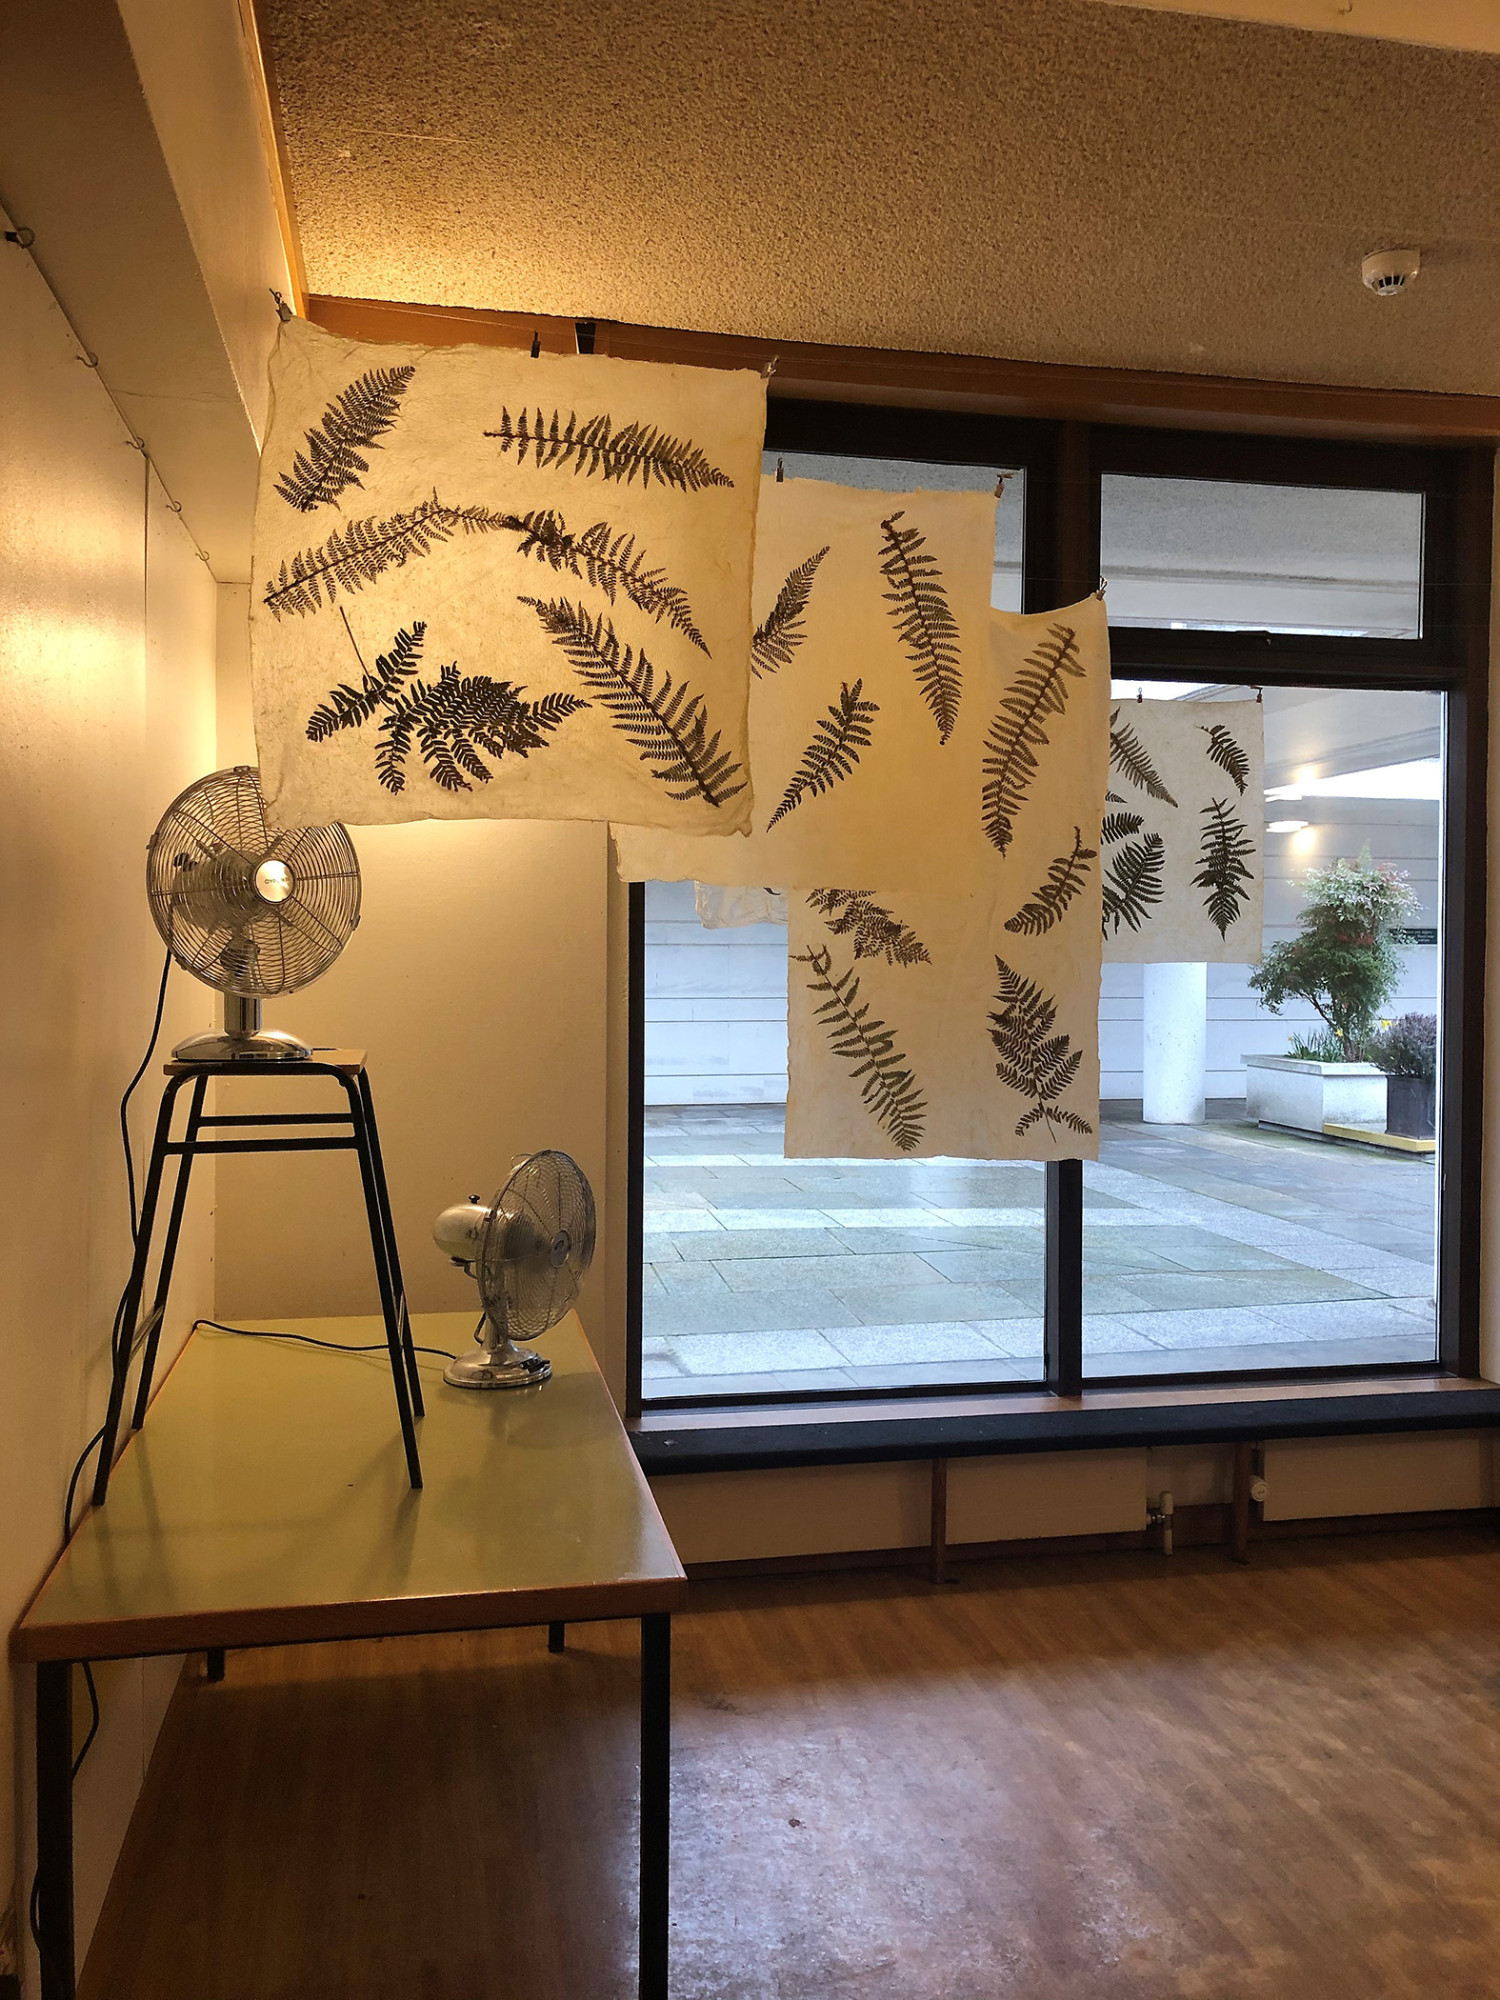 "Contingent on Carbon", 2019, Installation – Latex, fern fronds, lab stools, desk fans - Sarah Strachan